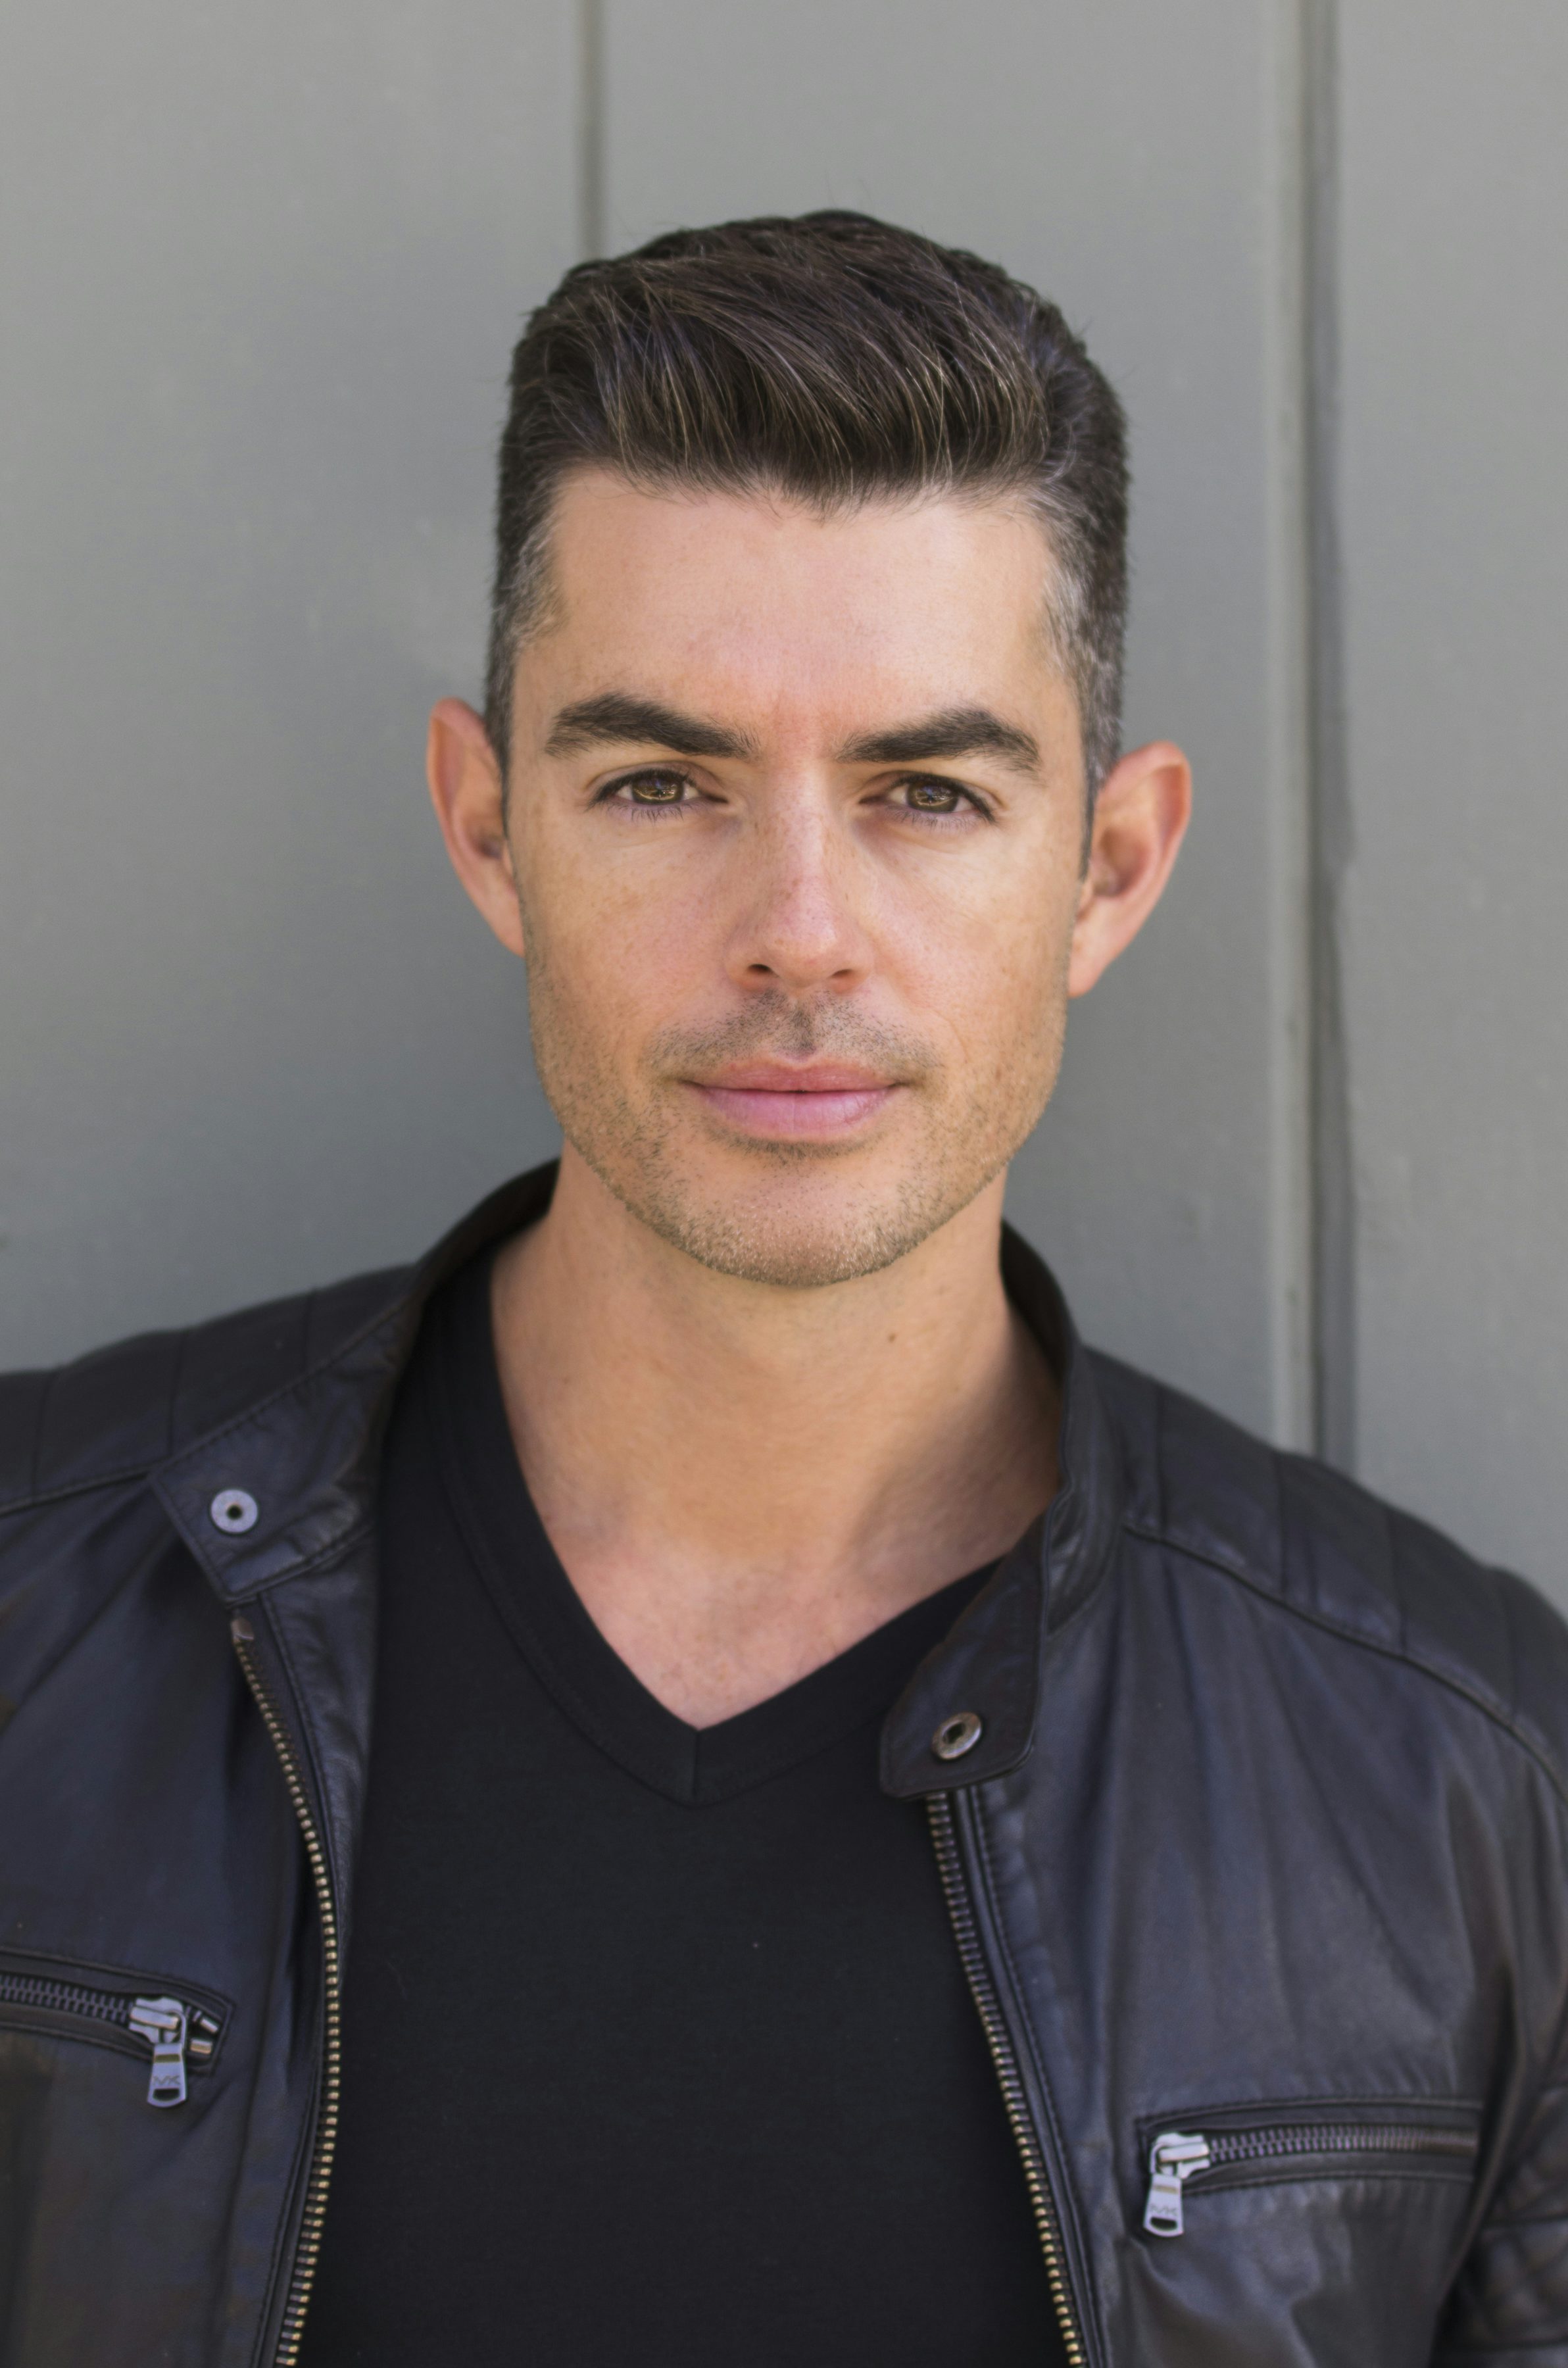 travel advisor Jason Leon, with close-cropped gelled hair, wearing a black tee and a black leather jacket